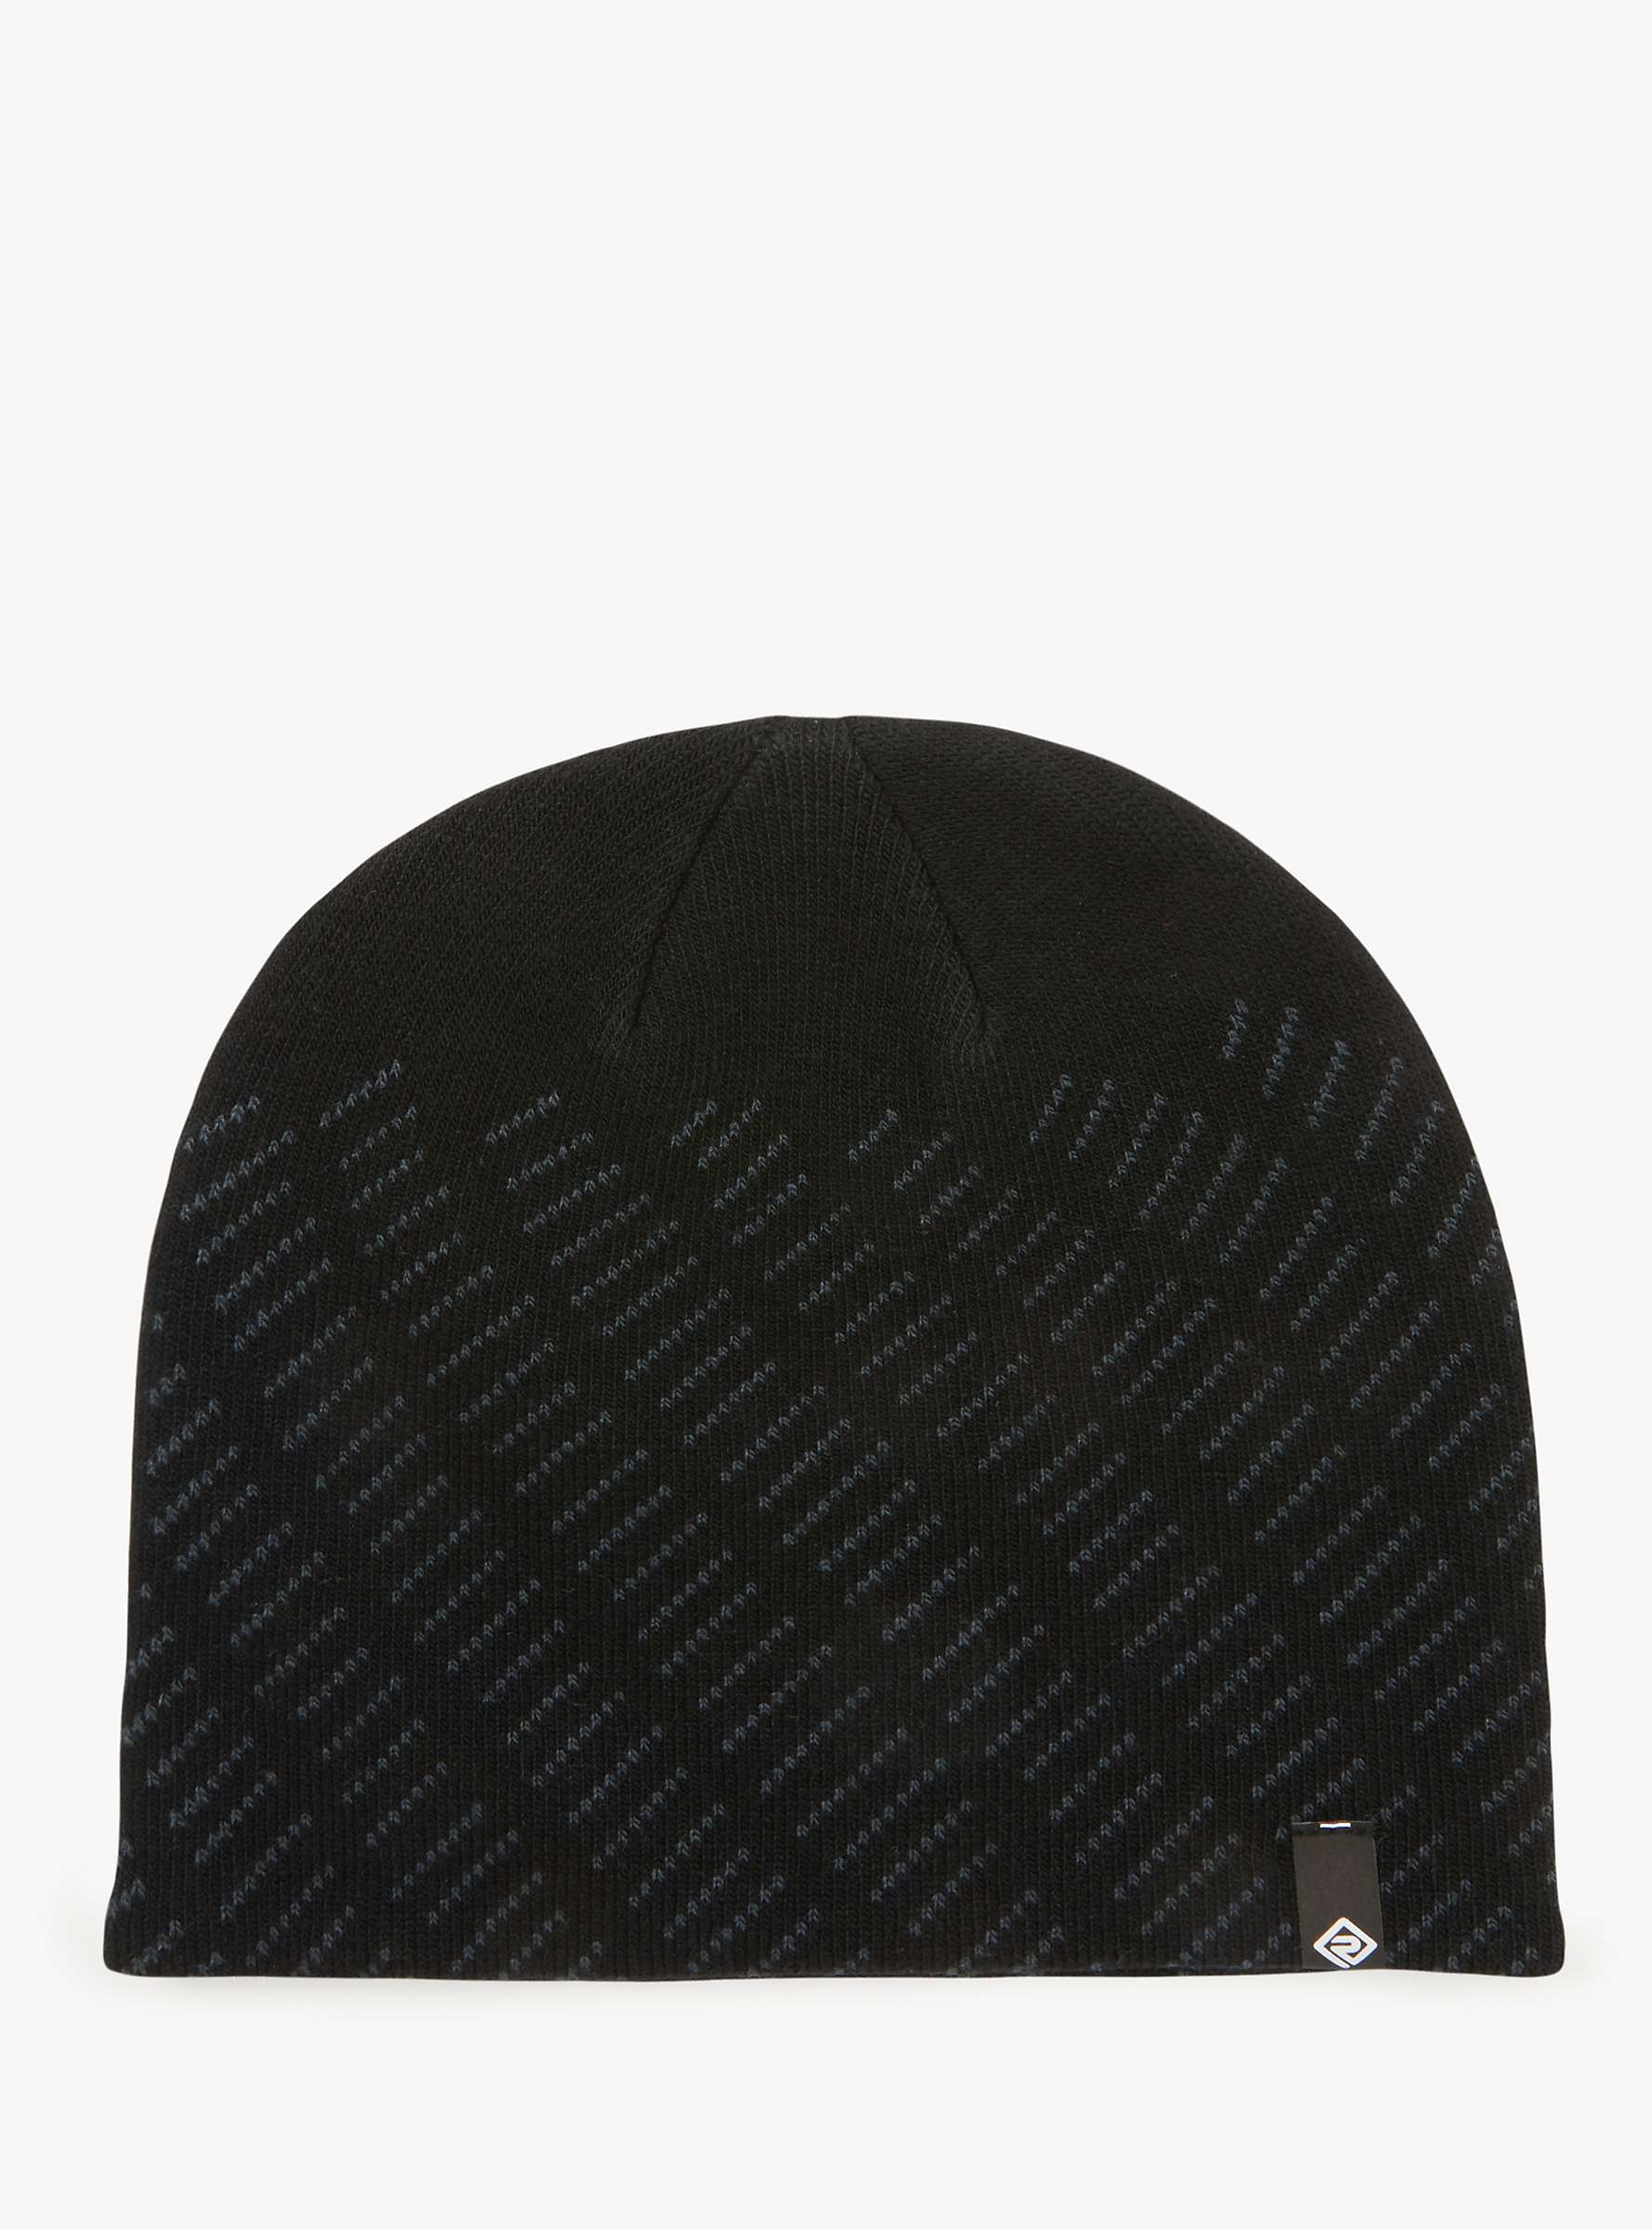 Buy Ronhill Classic Beanie Hat, One Size Online at johnlewis.com